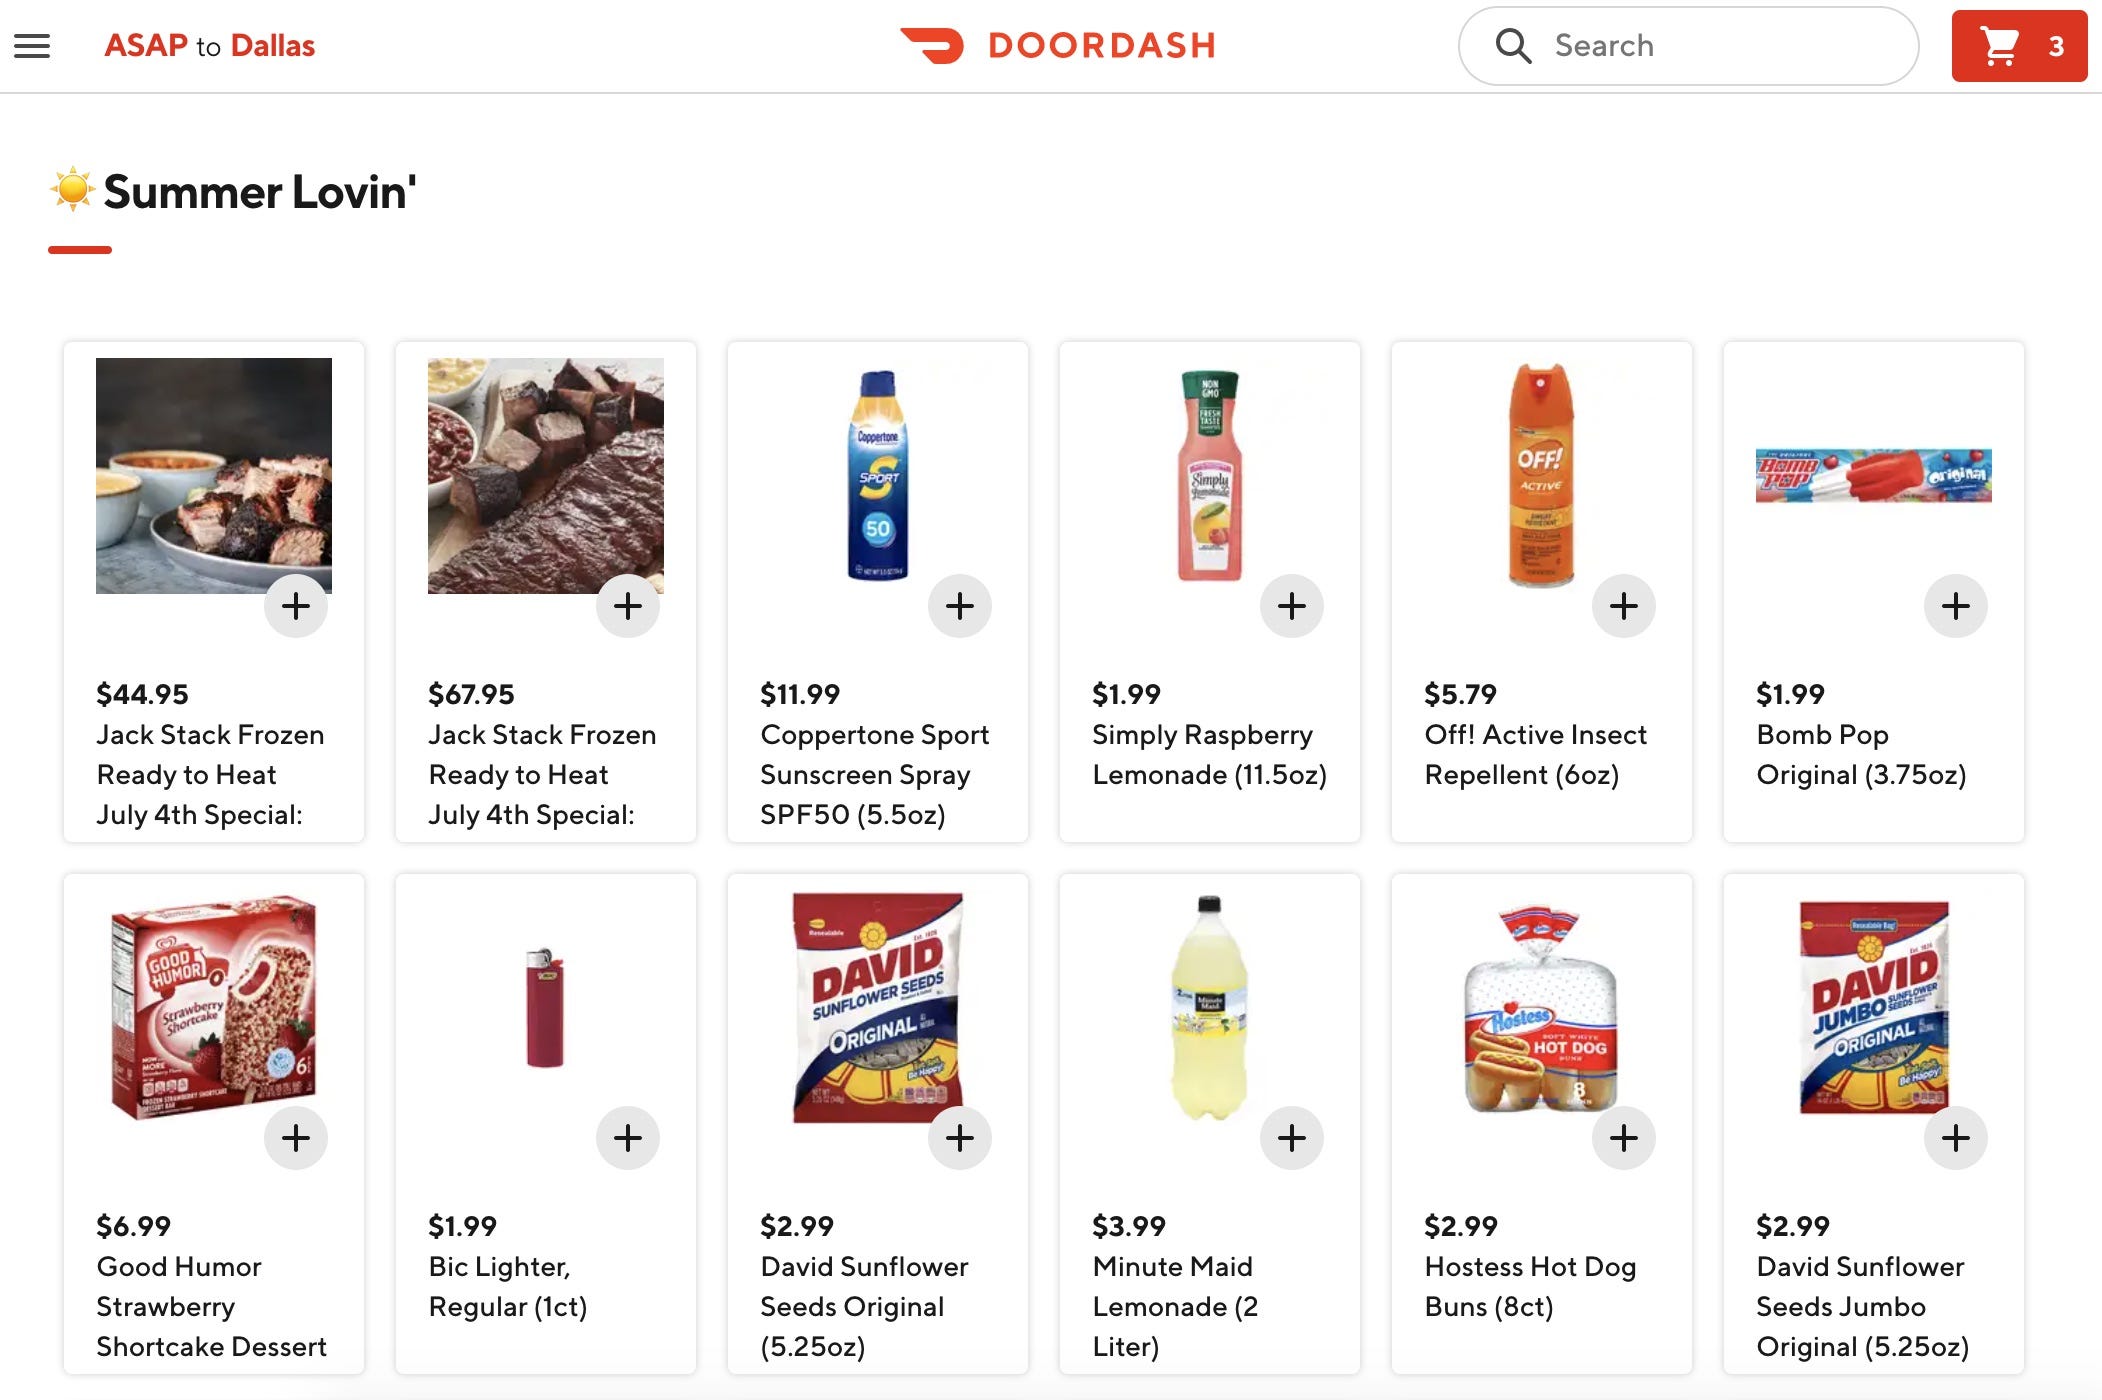 Two Cali grocers partner with DoorDash, adding on-demand delivery